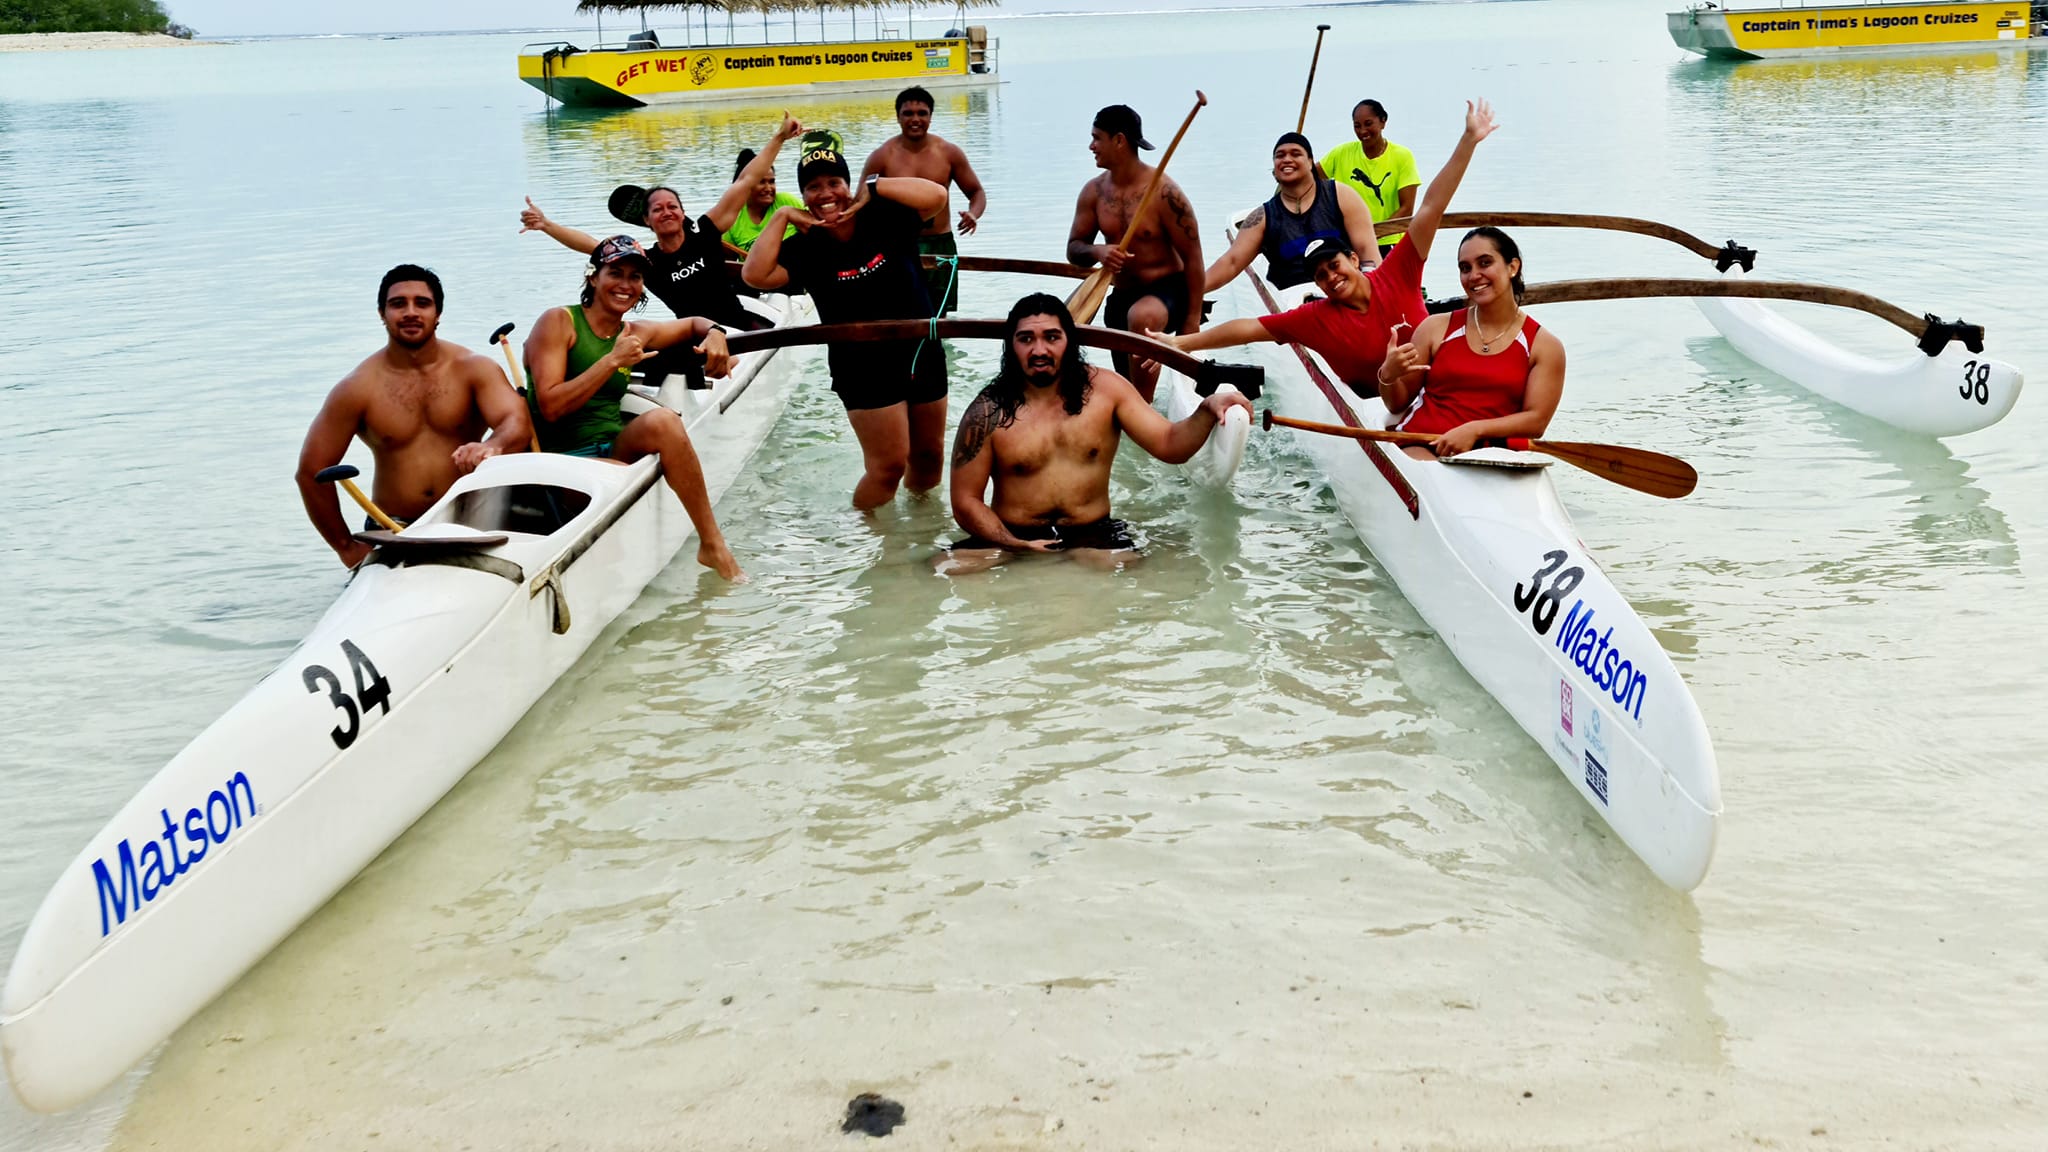 Paddlers ready to dig deep in Cook Islands Games Oe Vaka sprint races